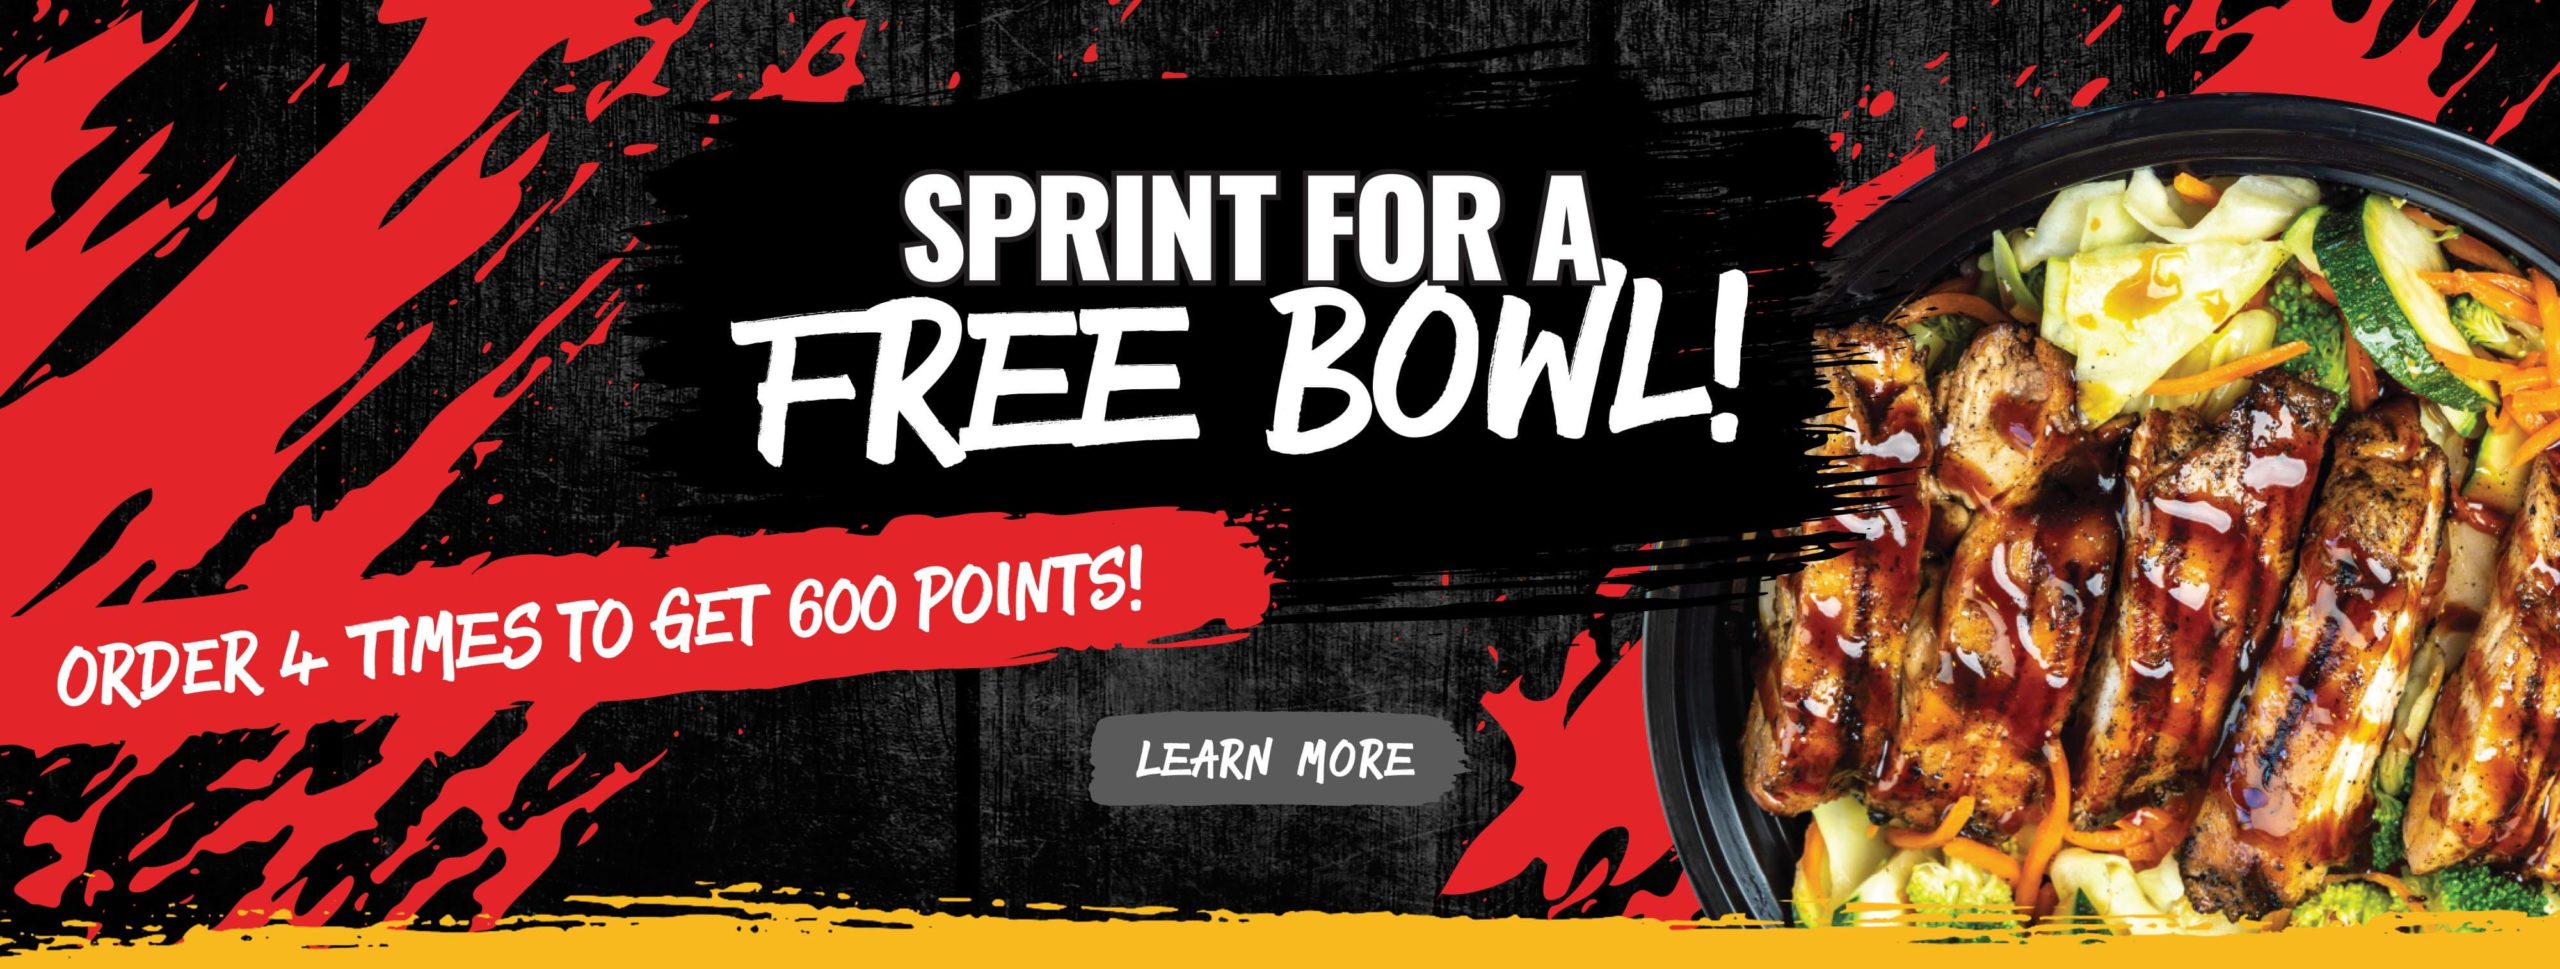 Sprint for a free bowl! Click here to learn more